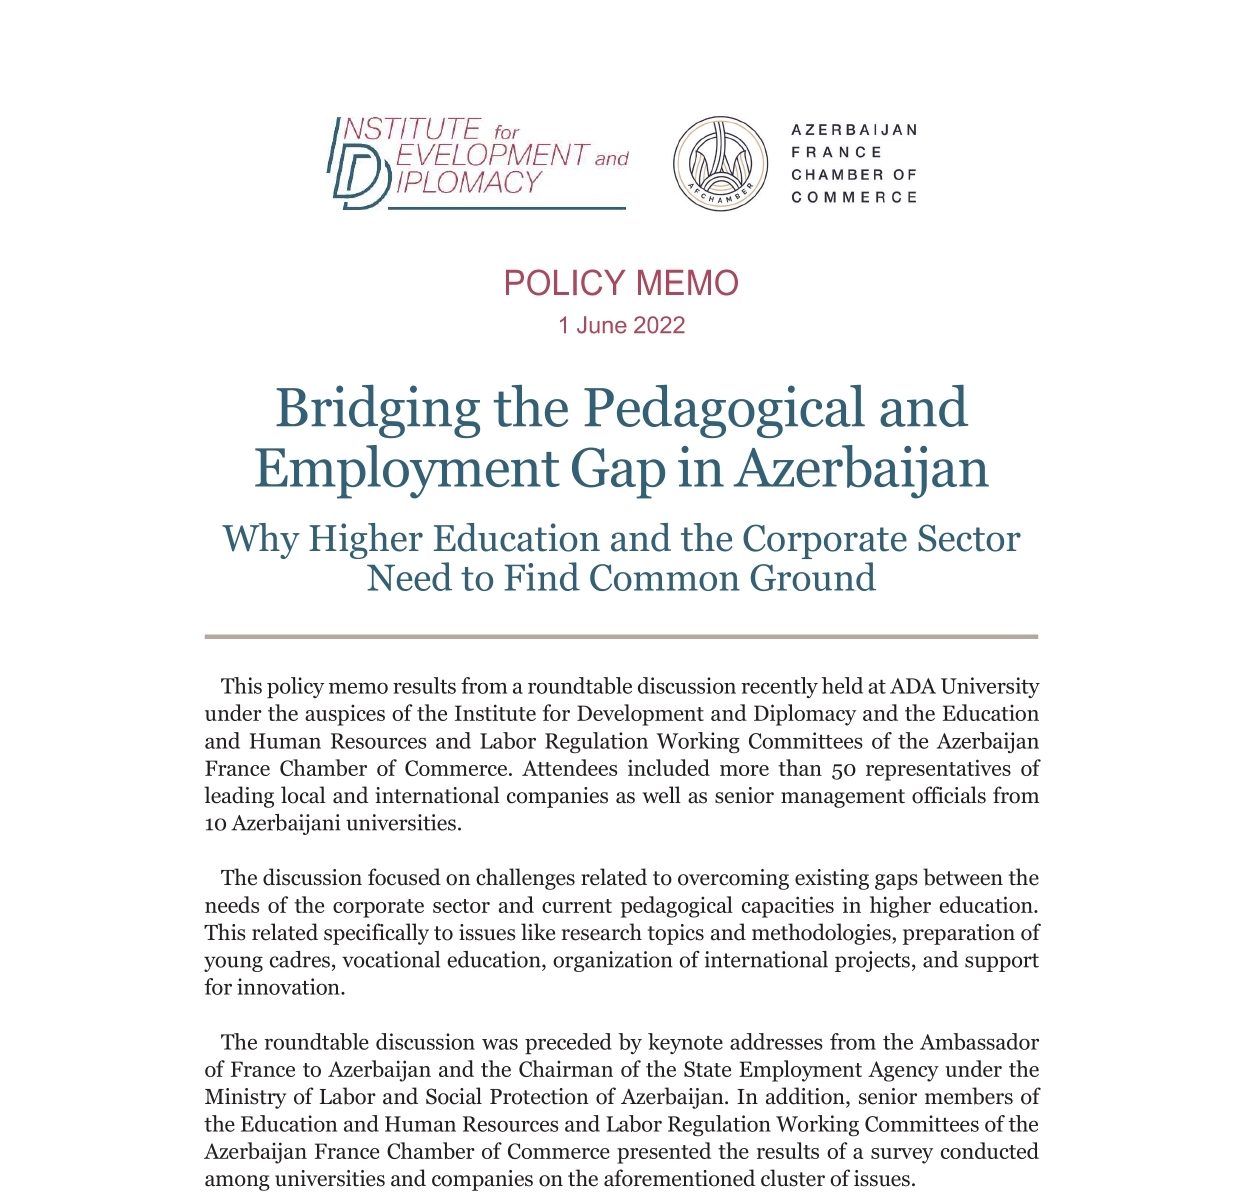 Policy Memo on “Bridging the Pedagogical and Employment Gap in Azerbaijan”.